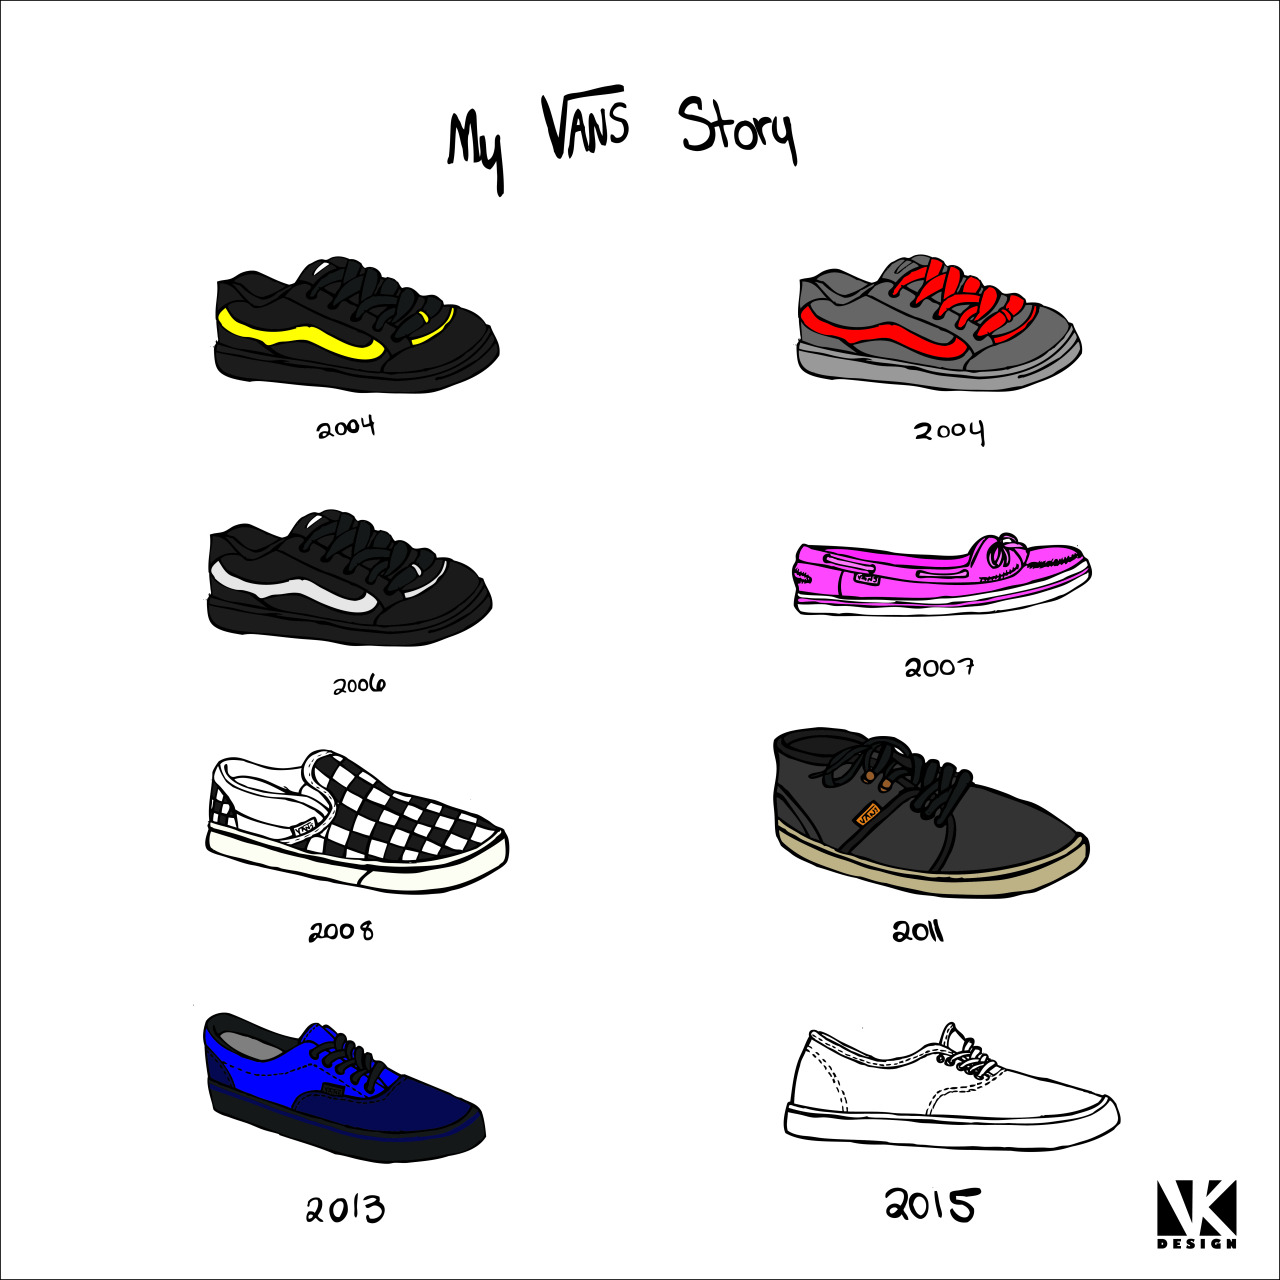 Timeline of all the Vans shoes I have owned